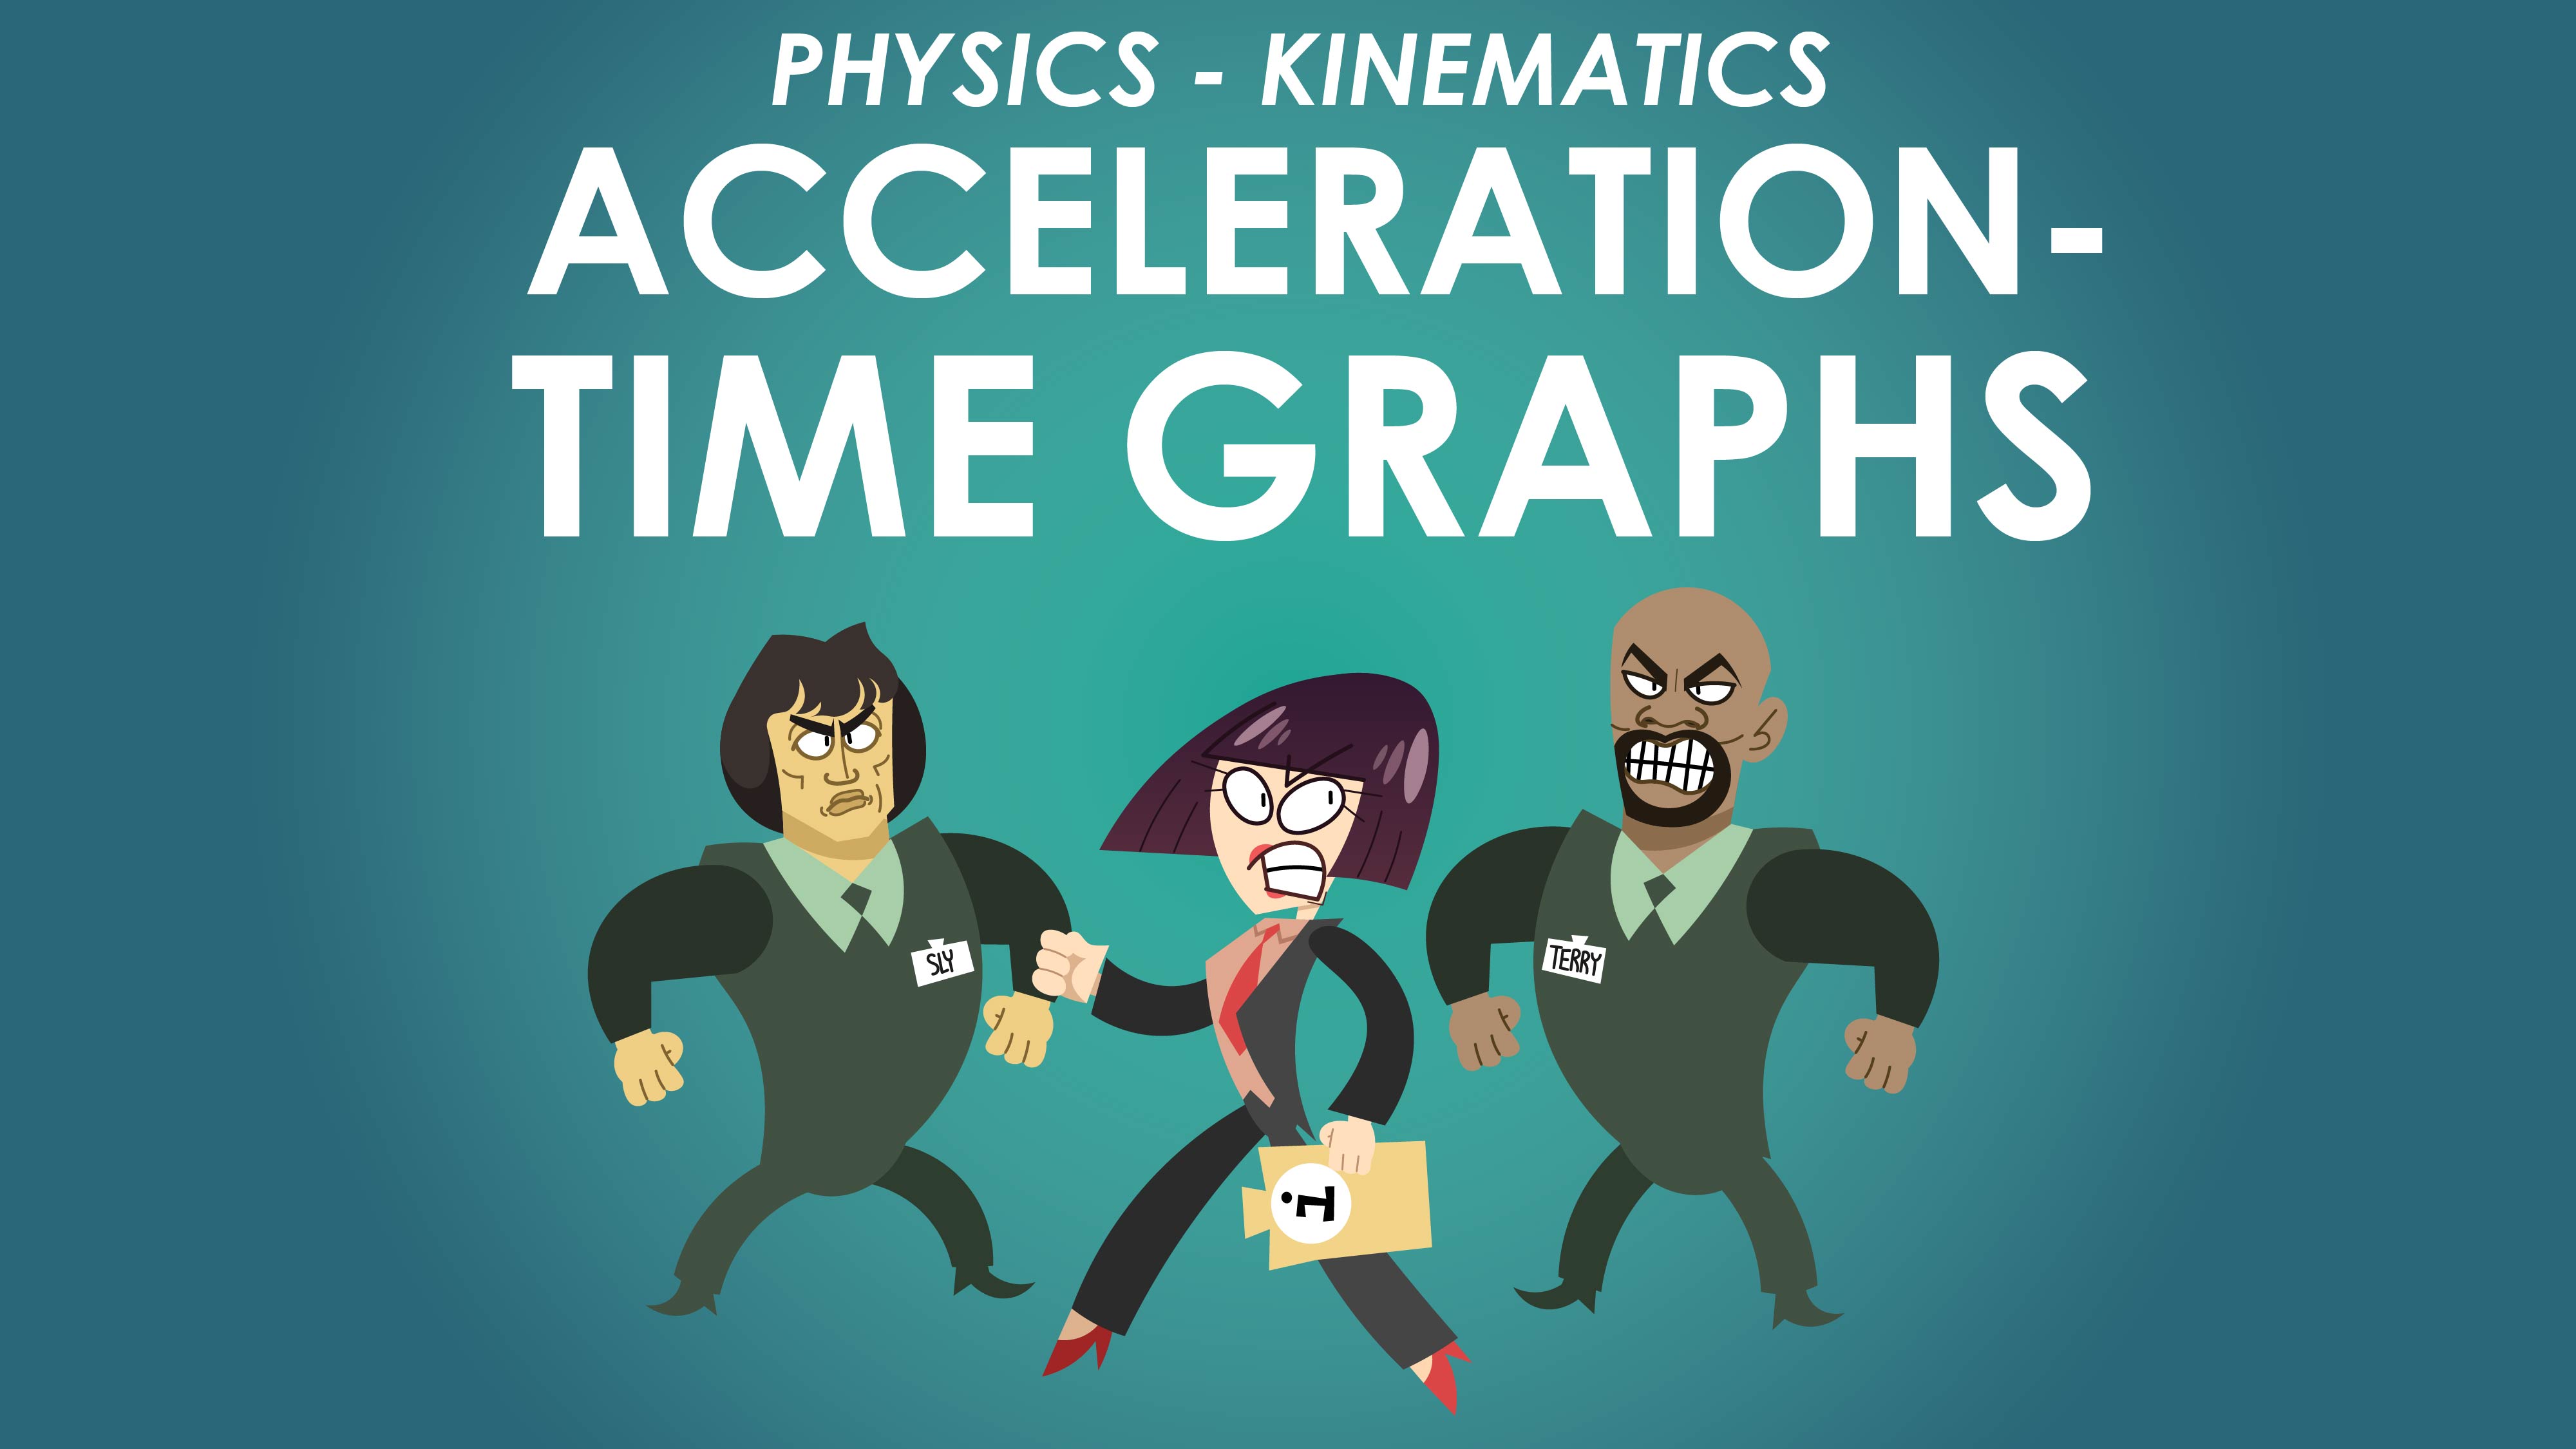 Acceleration-Time Graphs - Motion in a Straight Line